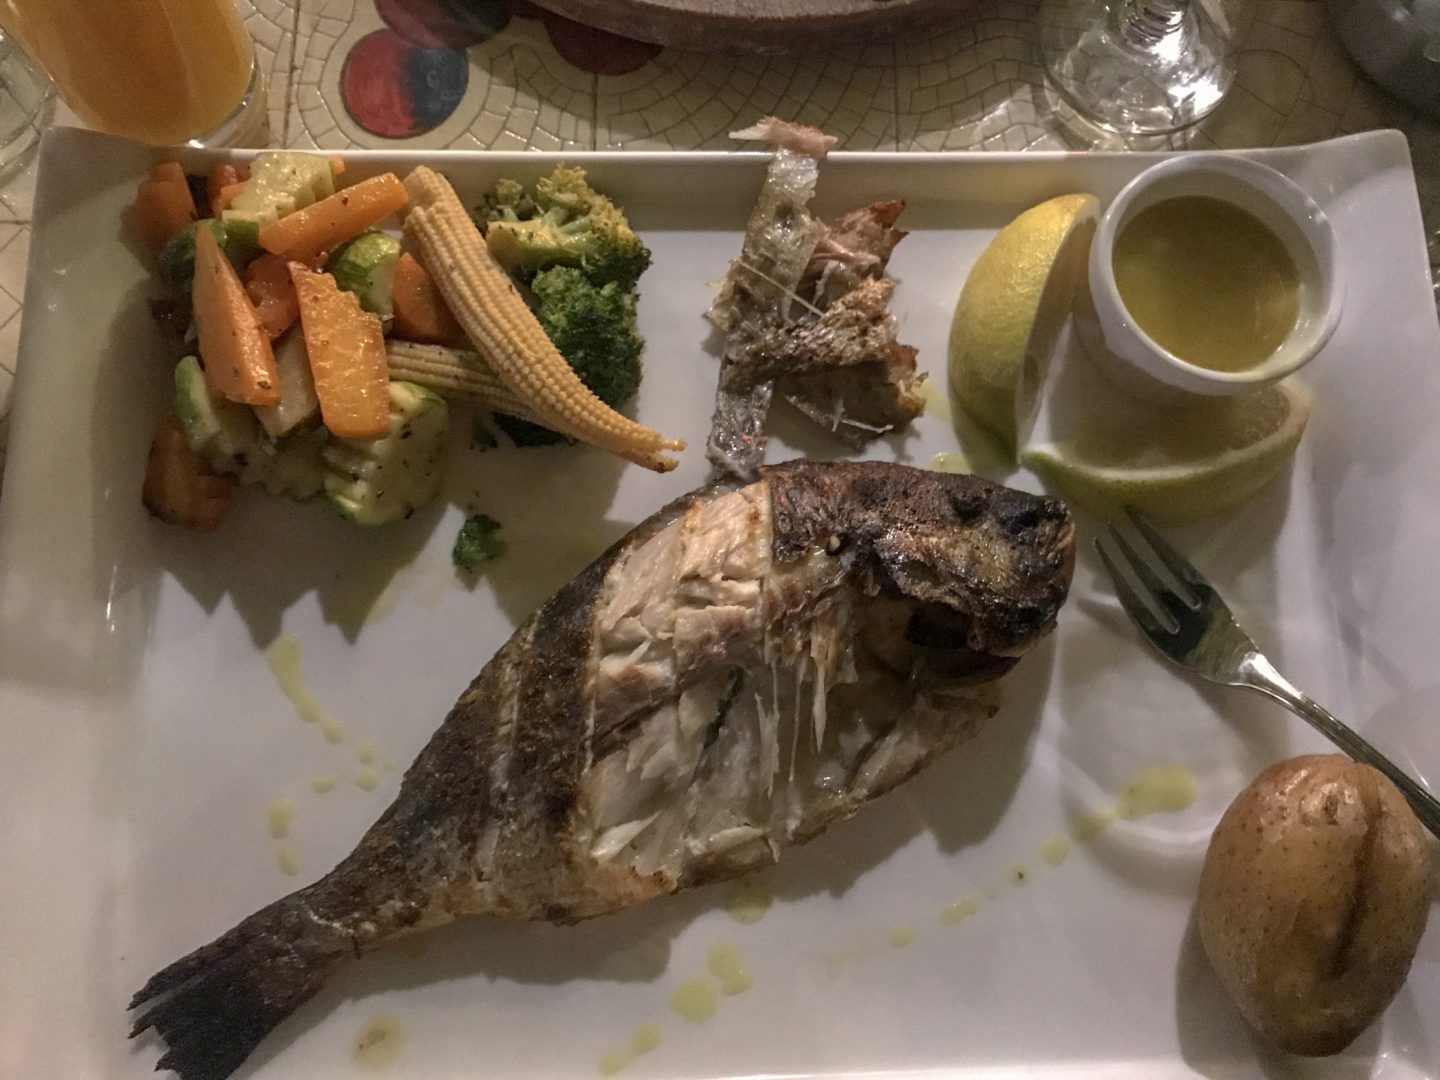  Jordan Adventures Part 5 - Aqaba and the Red Sea - food photo - grilled fish with lemon sauce and vegetables